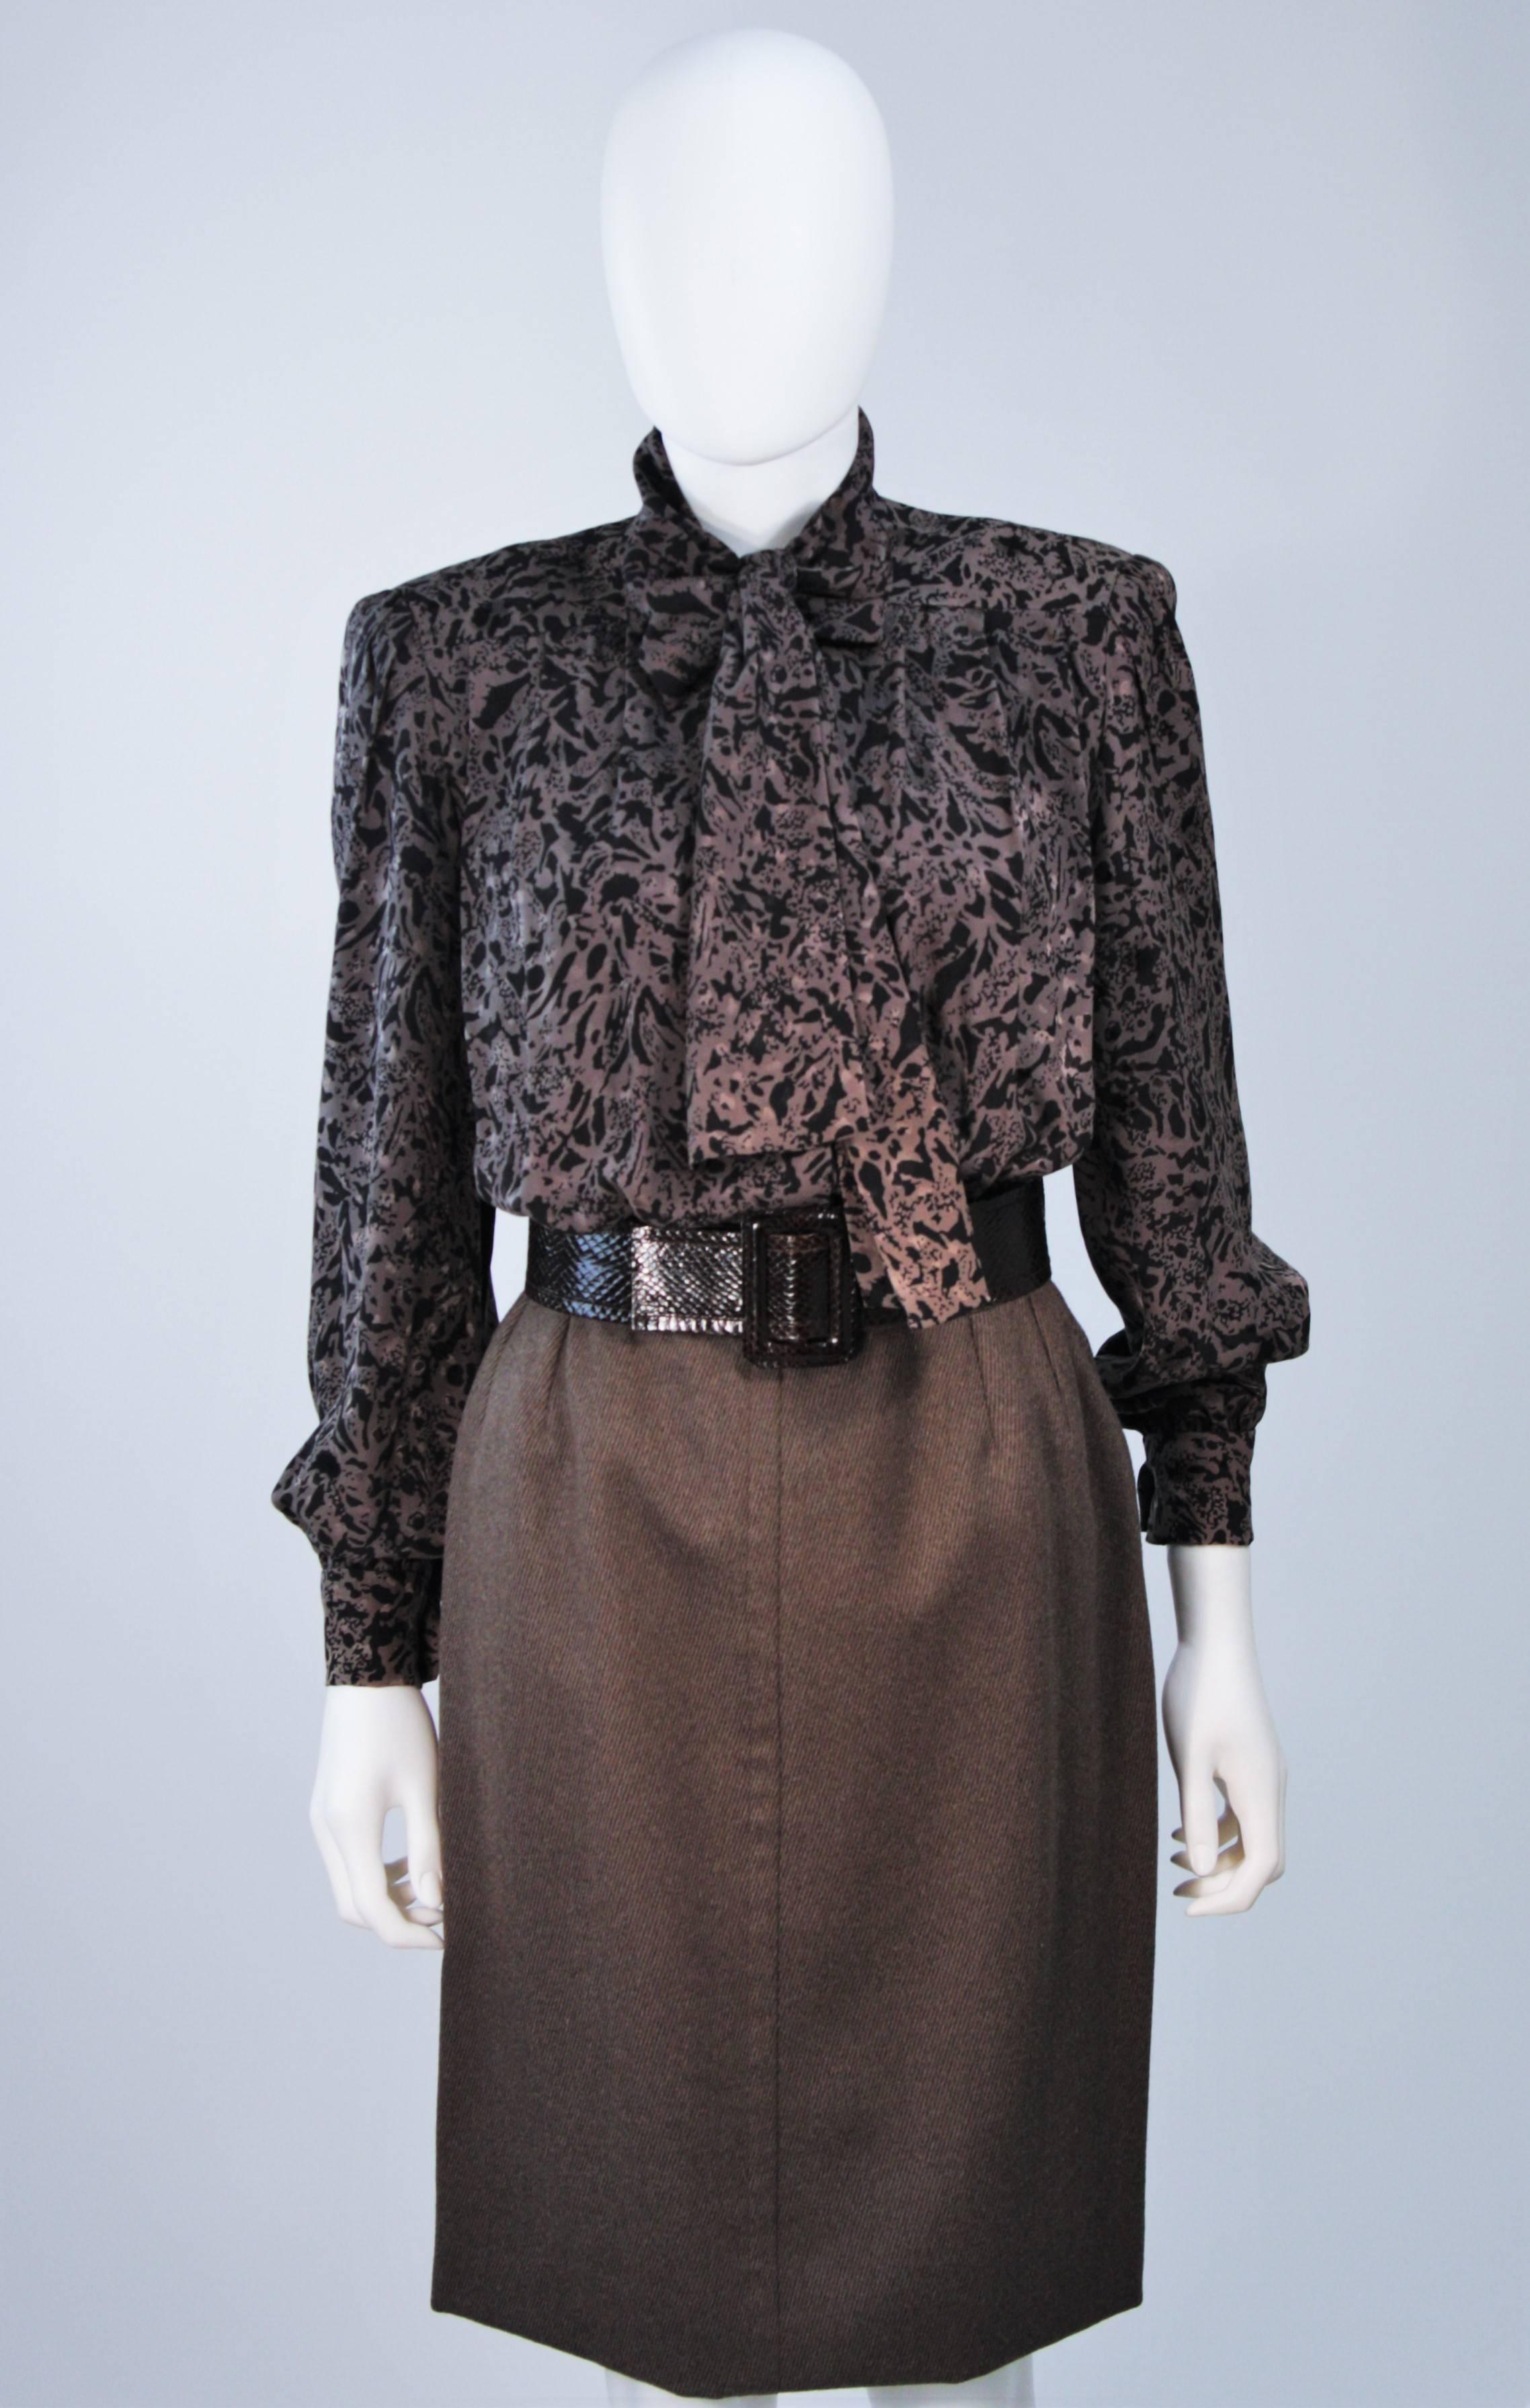 Black GIVENCHY COUTURE Wool Silk & Snakeskin 4pc Skirt Suit with Belt Size 4-6